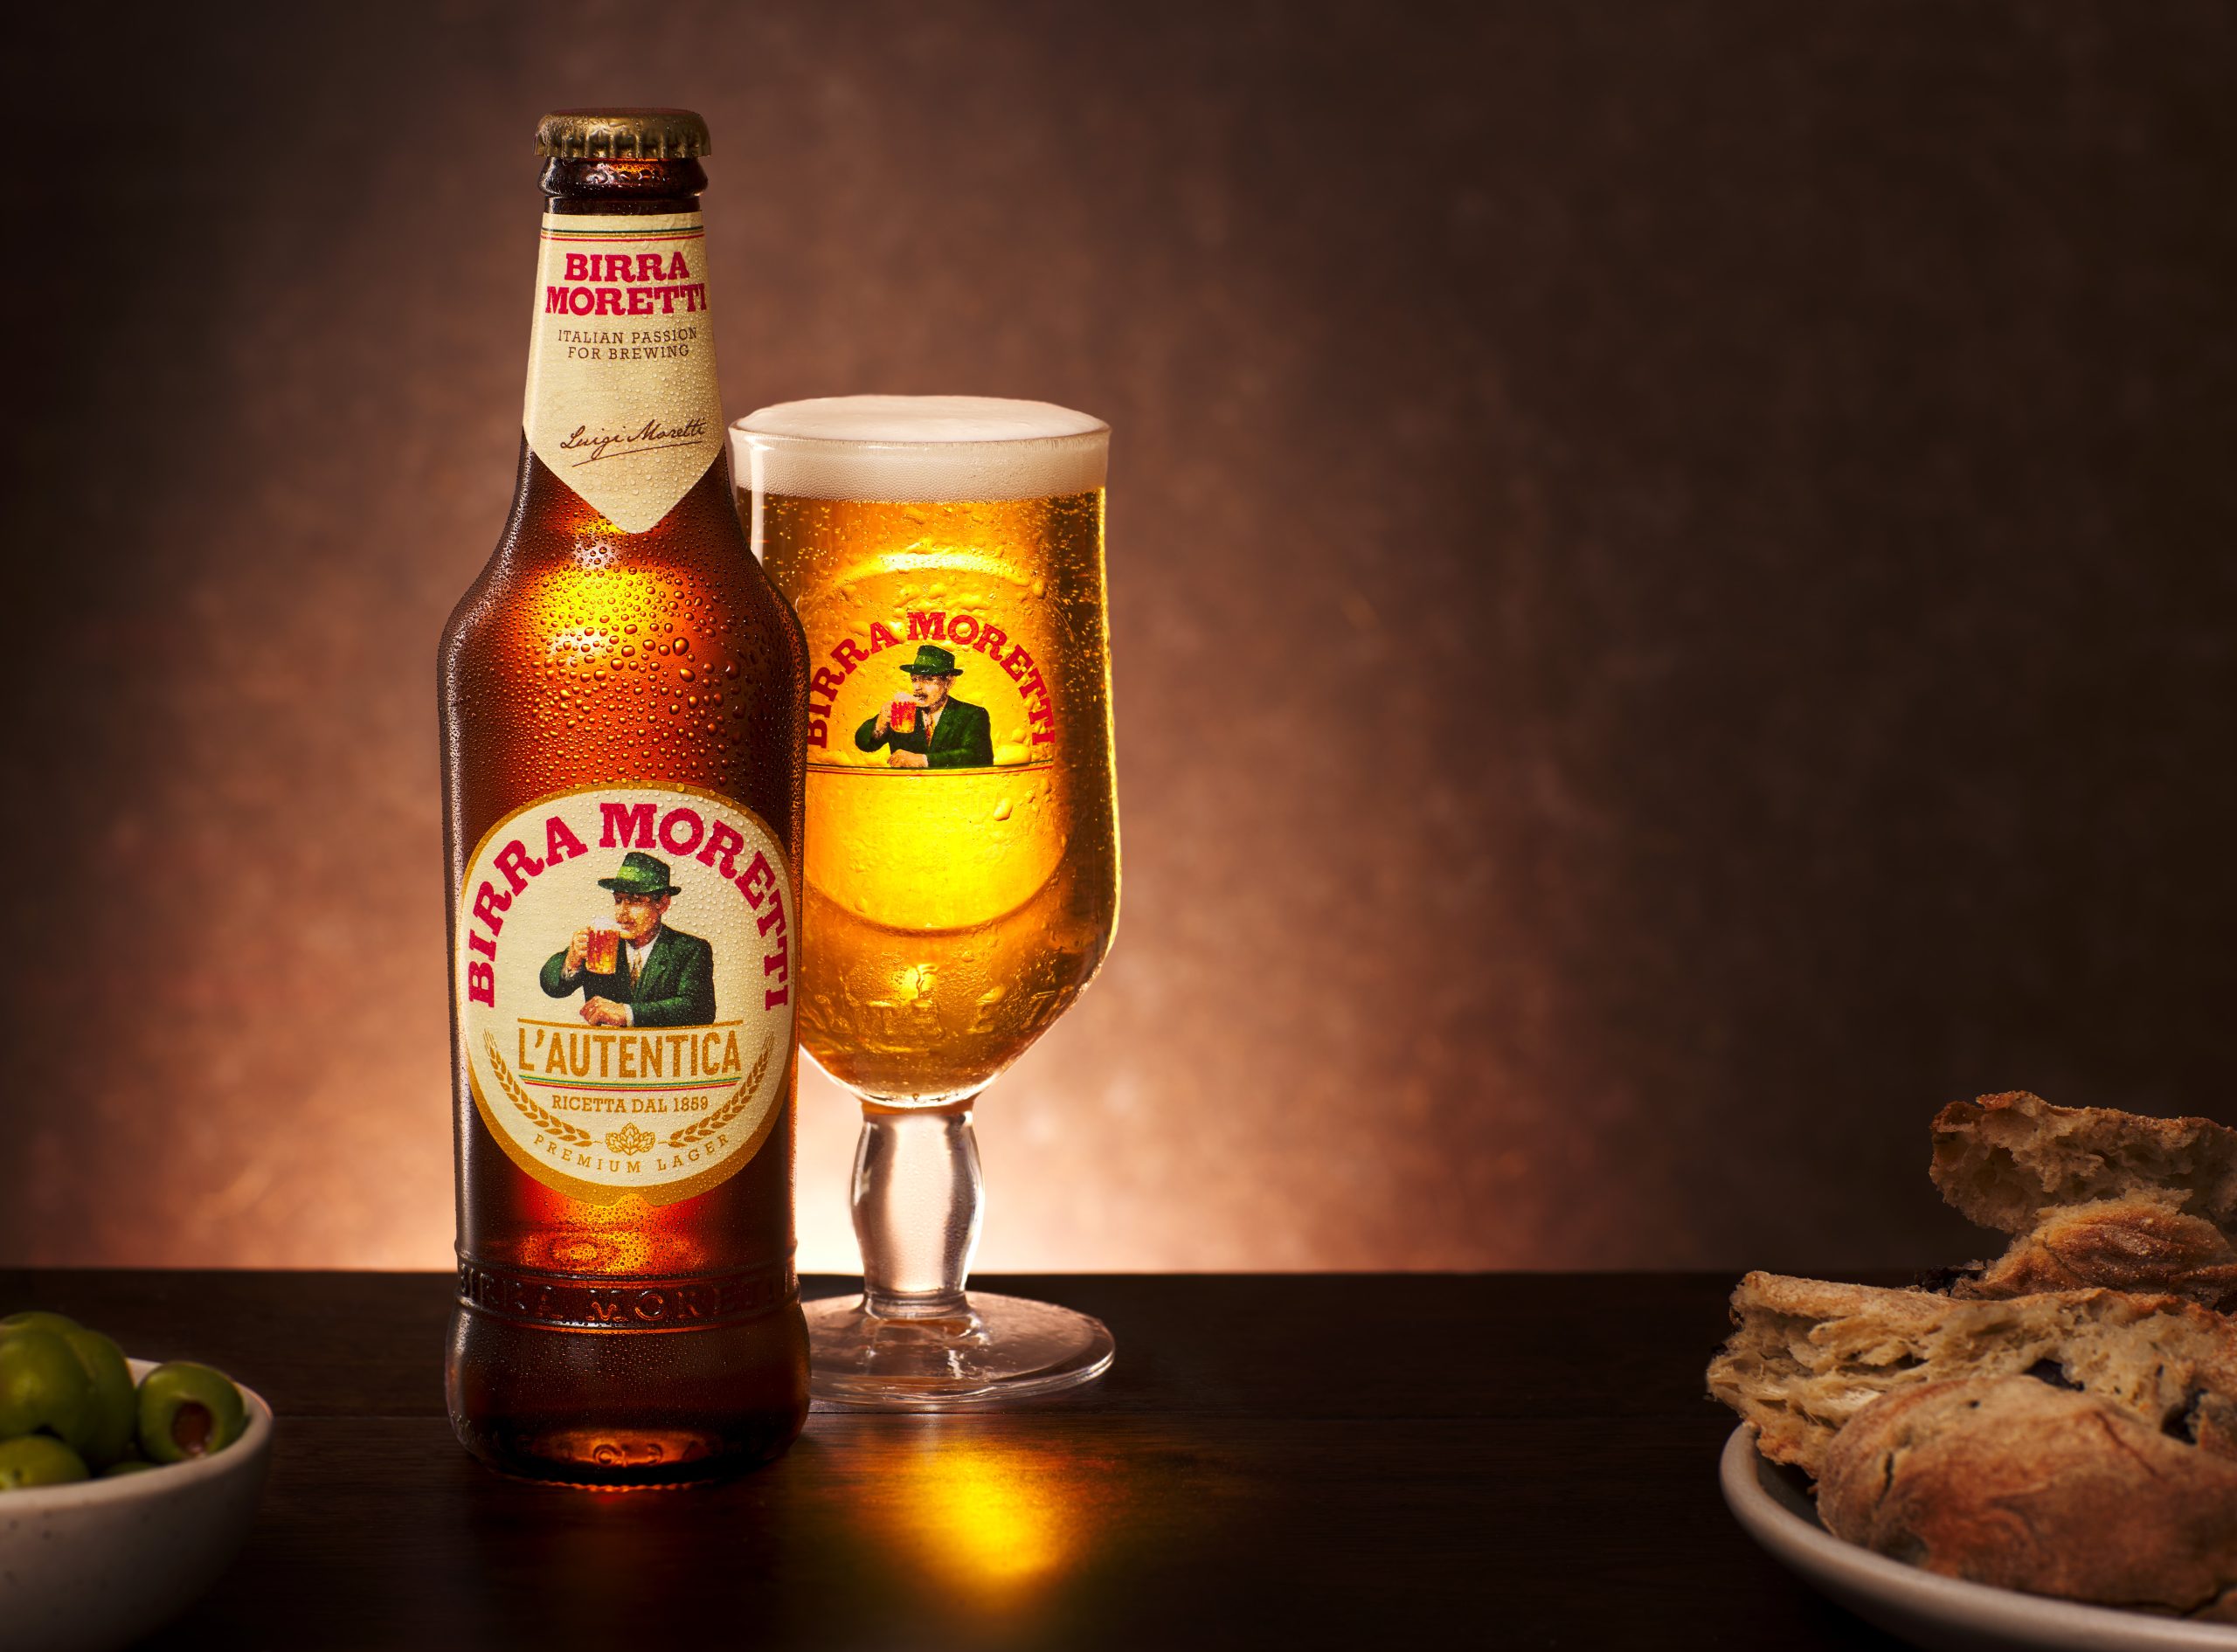 Birra Moretti with glass, olives, and bread on a warm-lit wooden table.